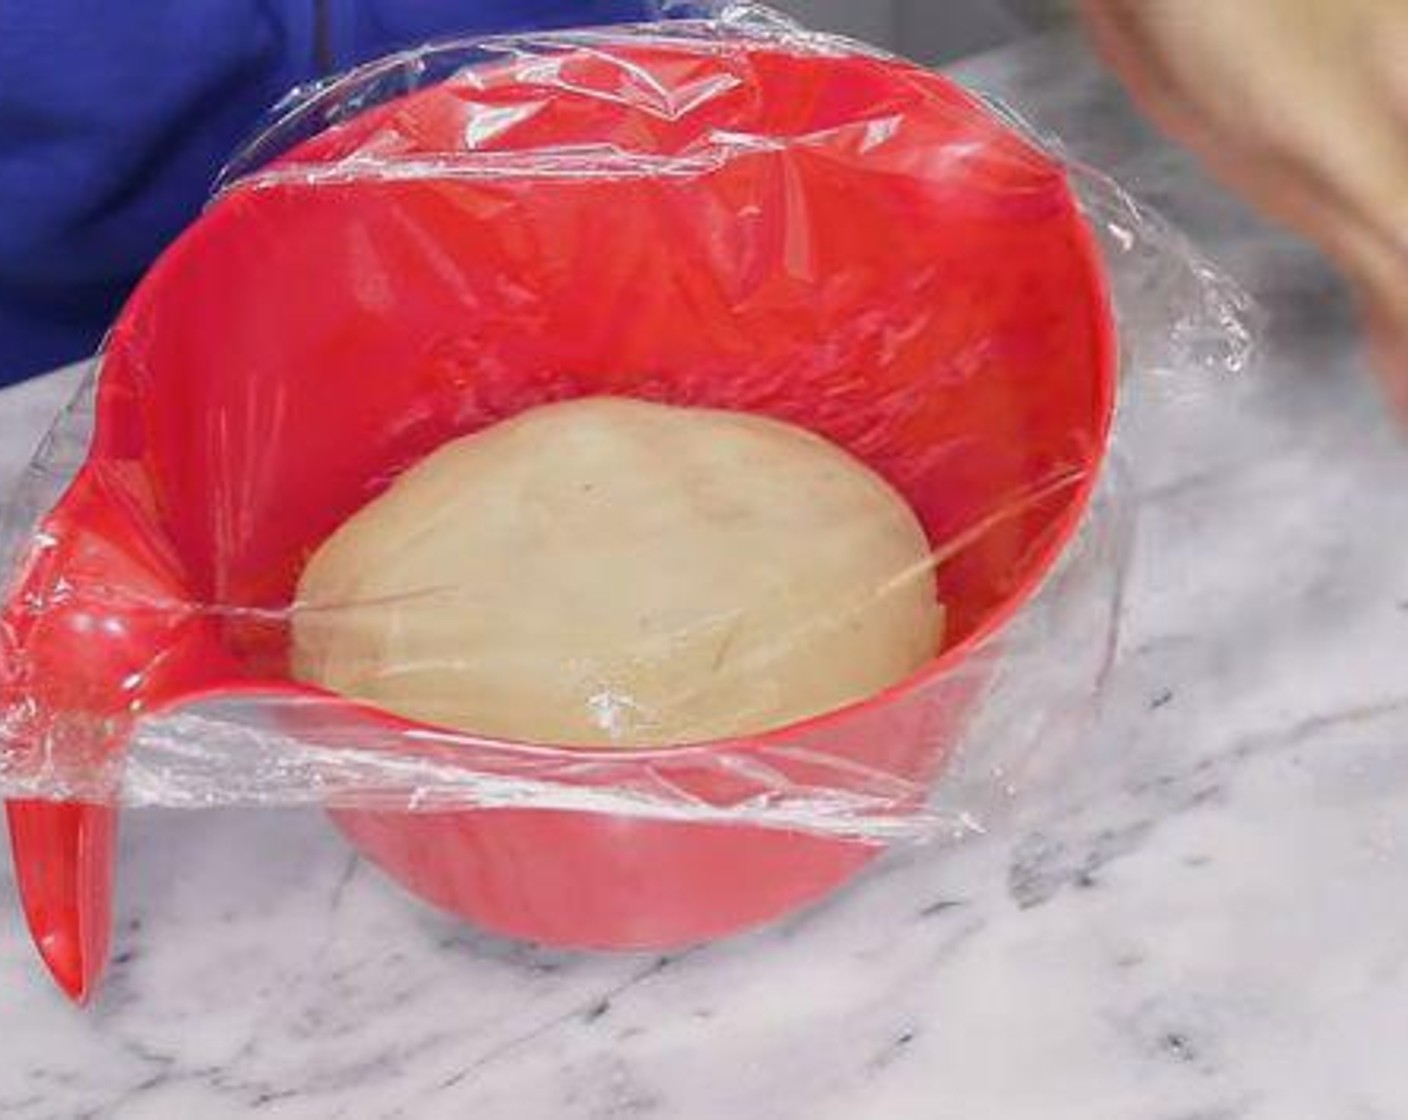 step 4 Grease the bowl with Oil (as needed) and add dough, brush the top of the dough and cover with plastic wrap and a kitchen towel and let it rise for 1:30 to 2 hours.